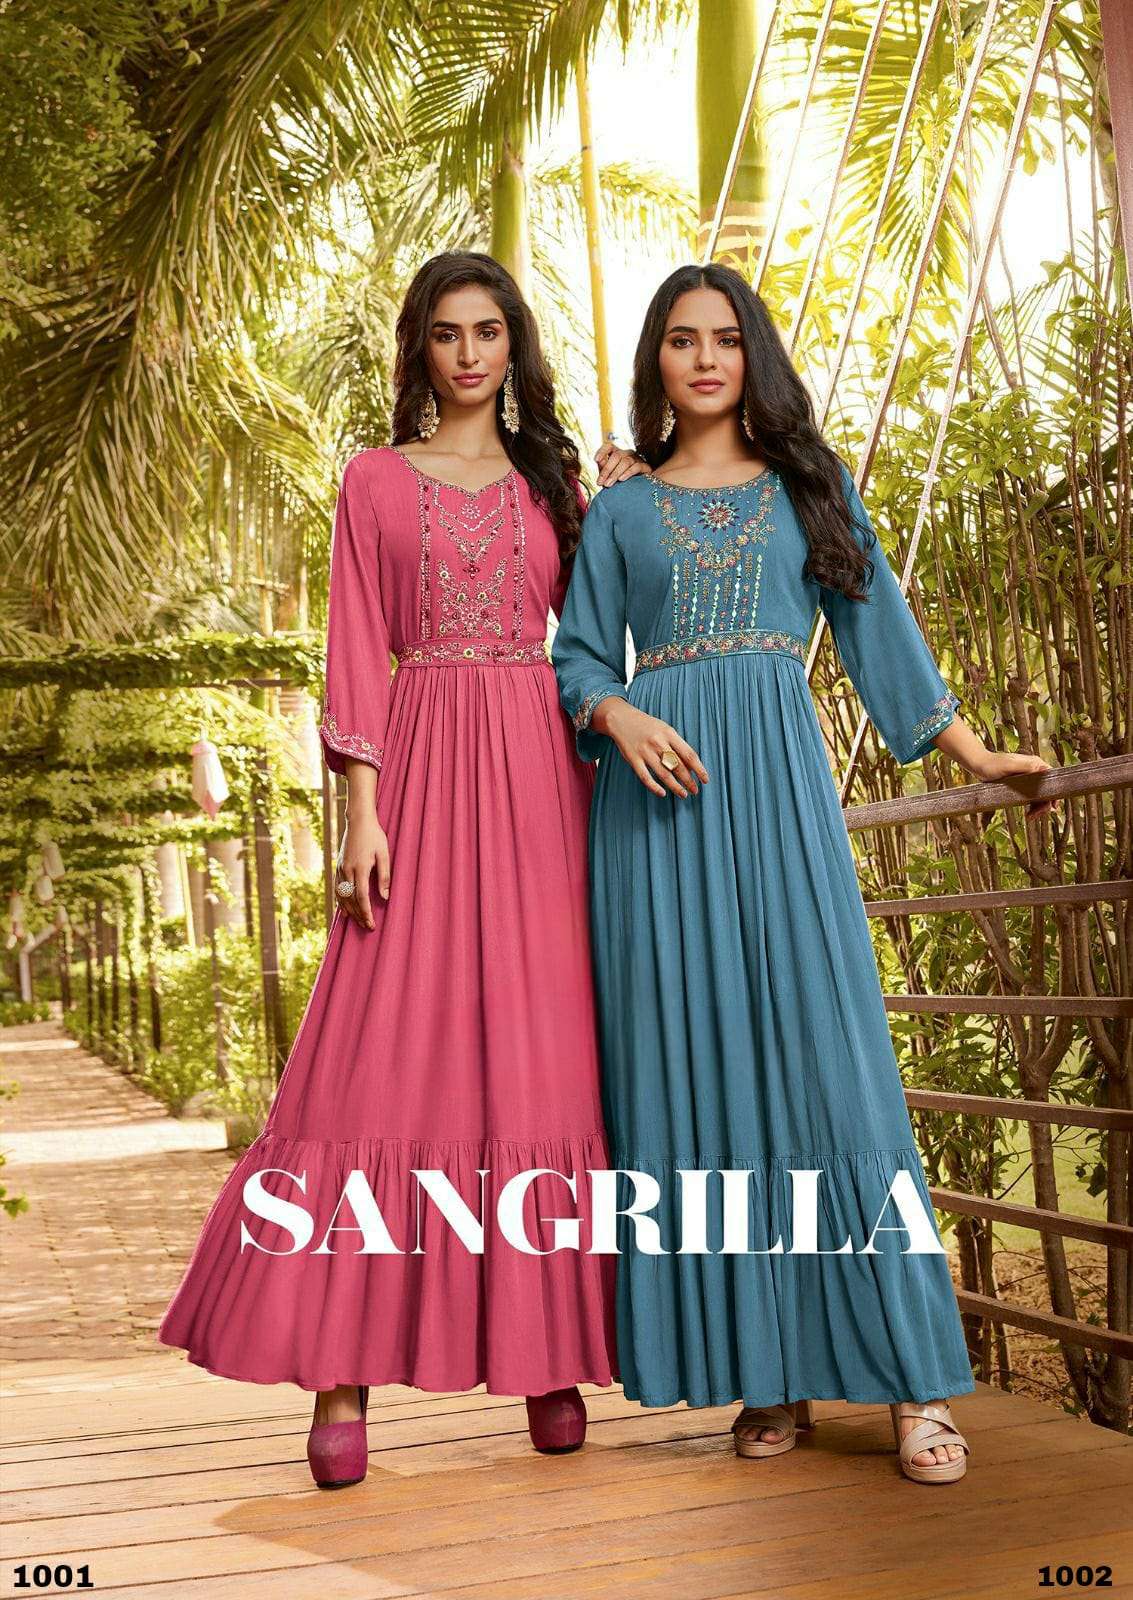 SANGRILLA RAYON RINKLE EMBROIDERY AND HANDWORK LONG KURTI WITH BELT BY S3FOREVER BRAND WHOLESALER AN...